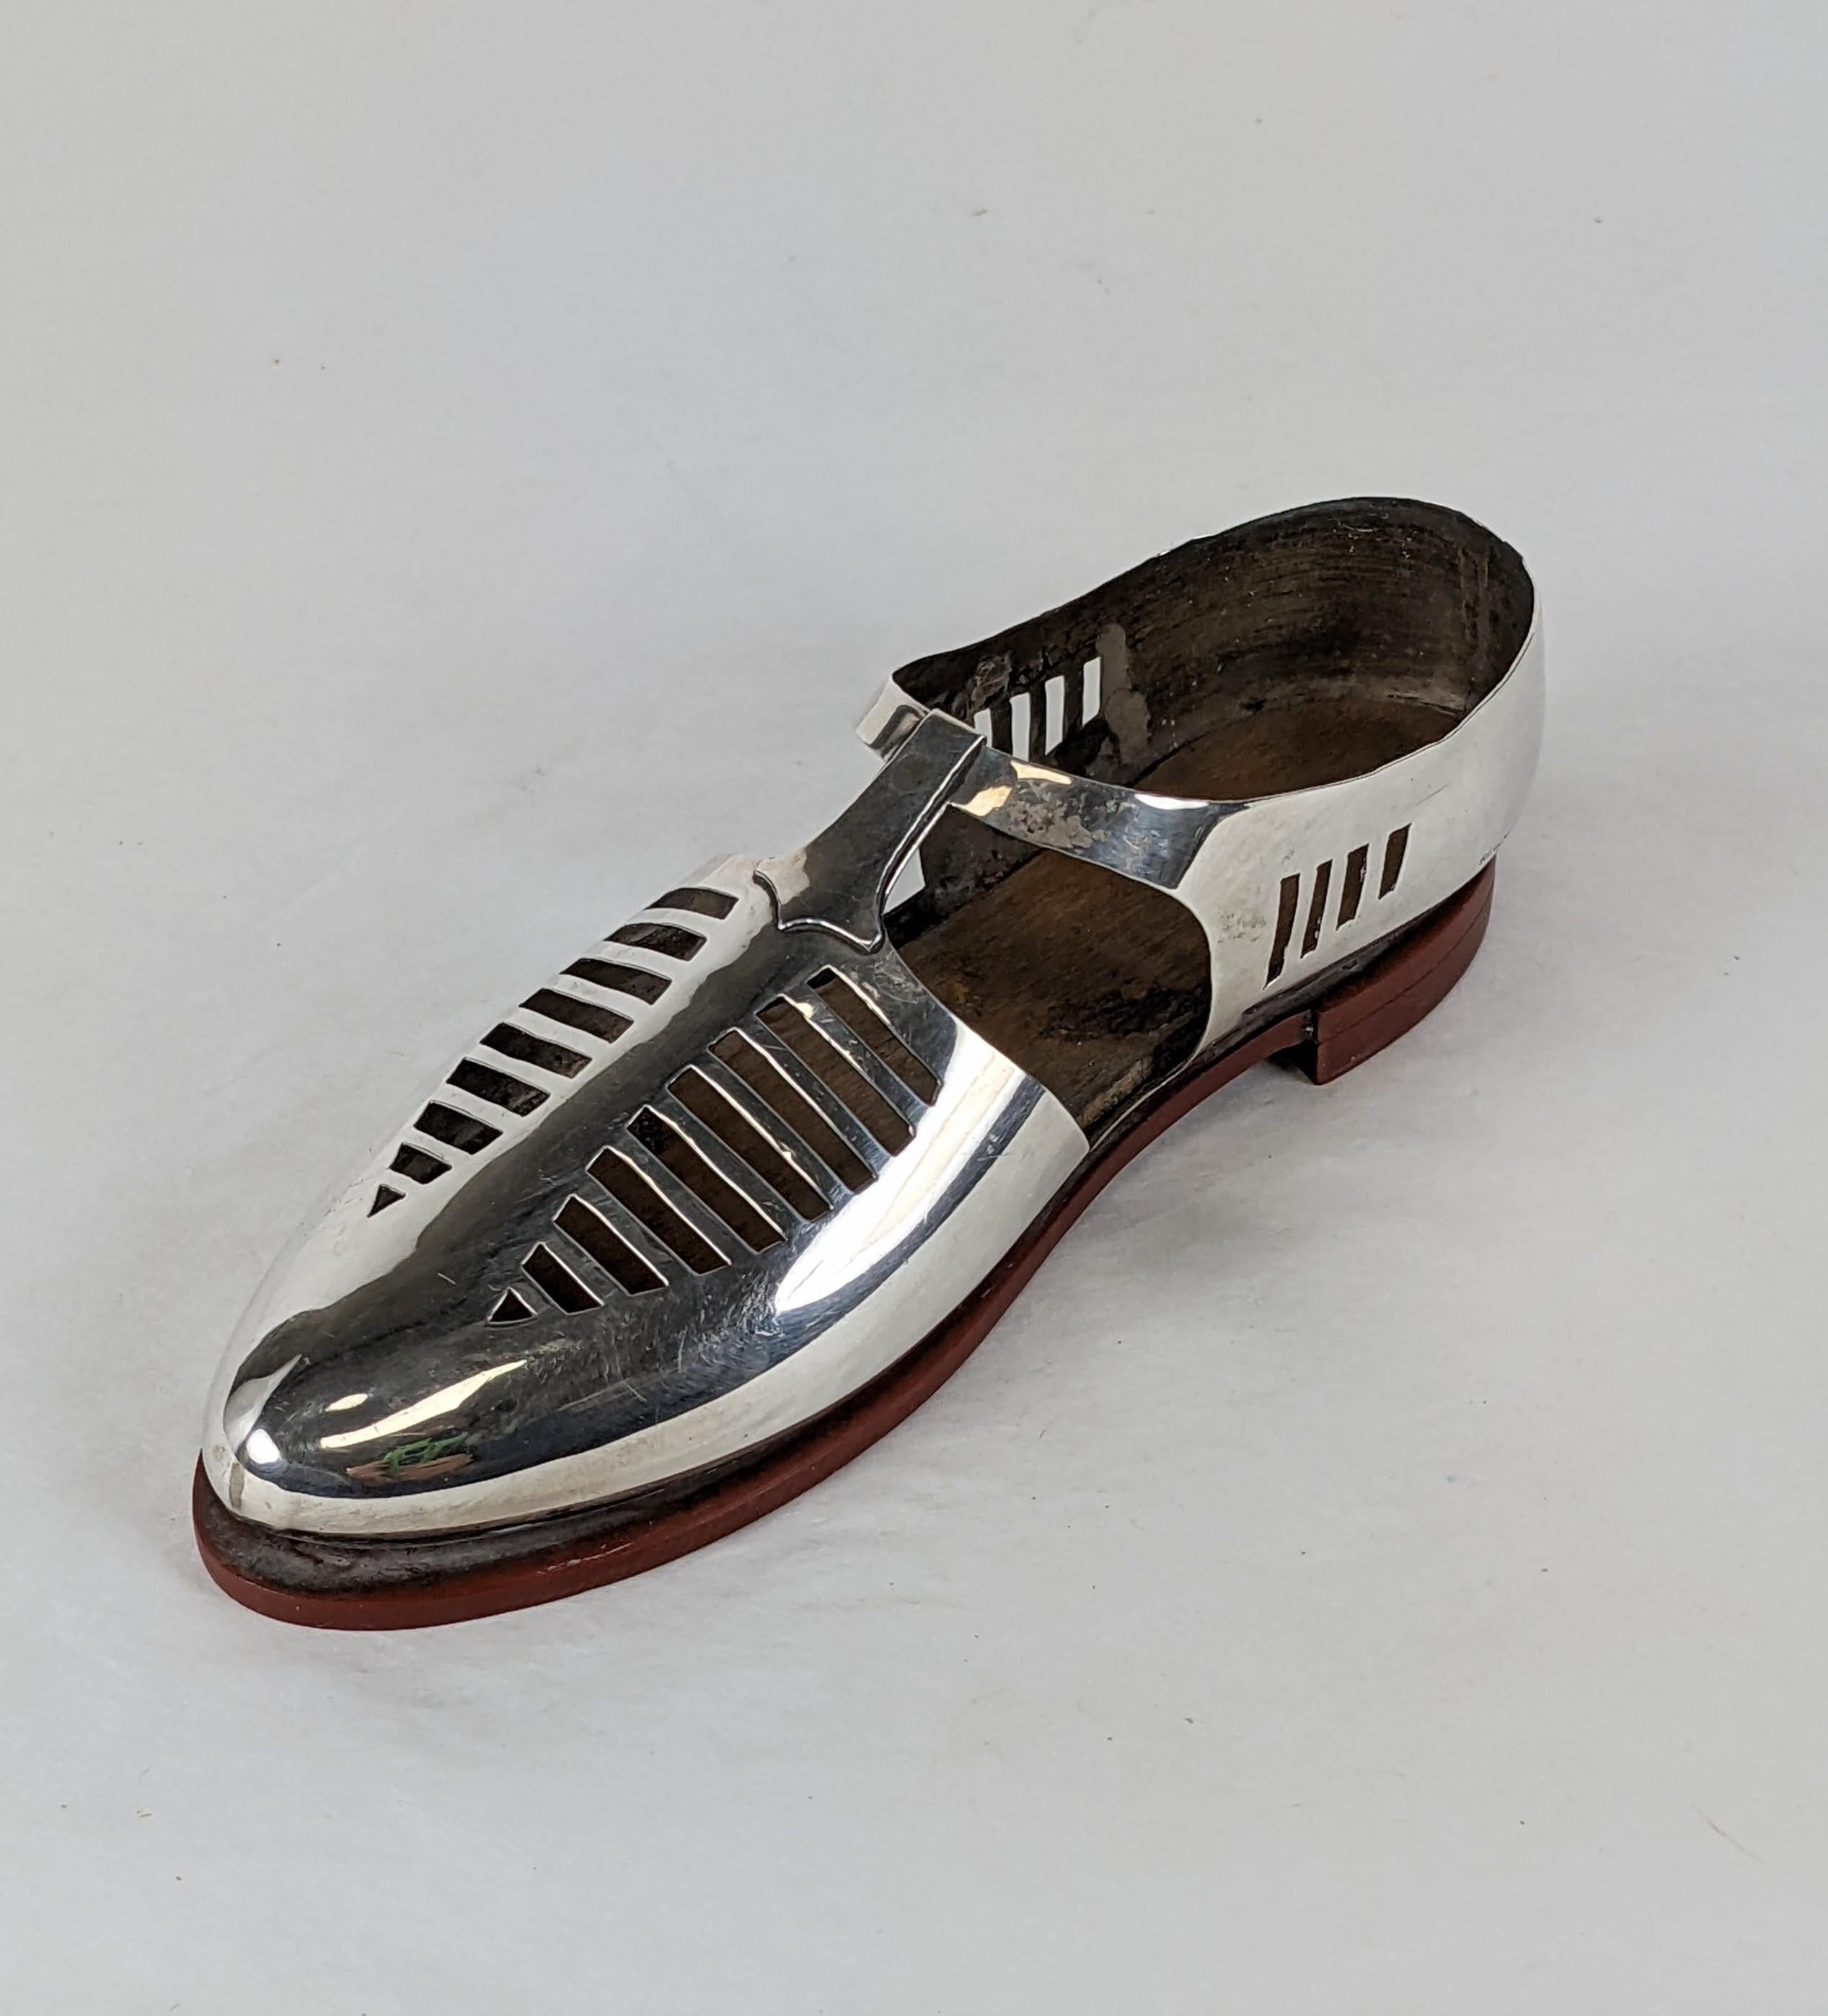 Charming Sterling Art Deco Shoe from the 1920's. Originally made as a pin cushion for use but now works as a decorative object. Super unusual T strap design of sterling with wood lined bakelite sole. Most sterling pin cushions were made with